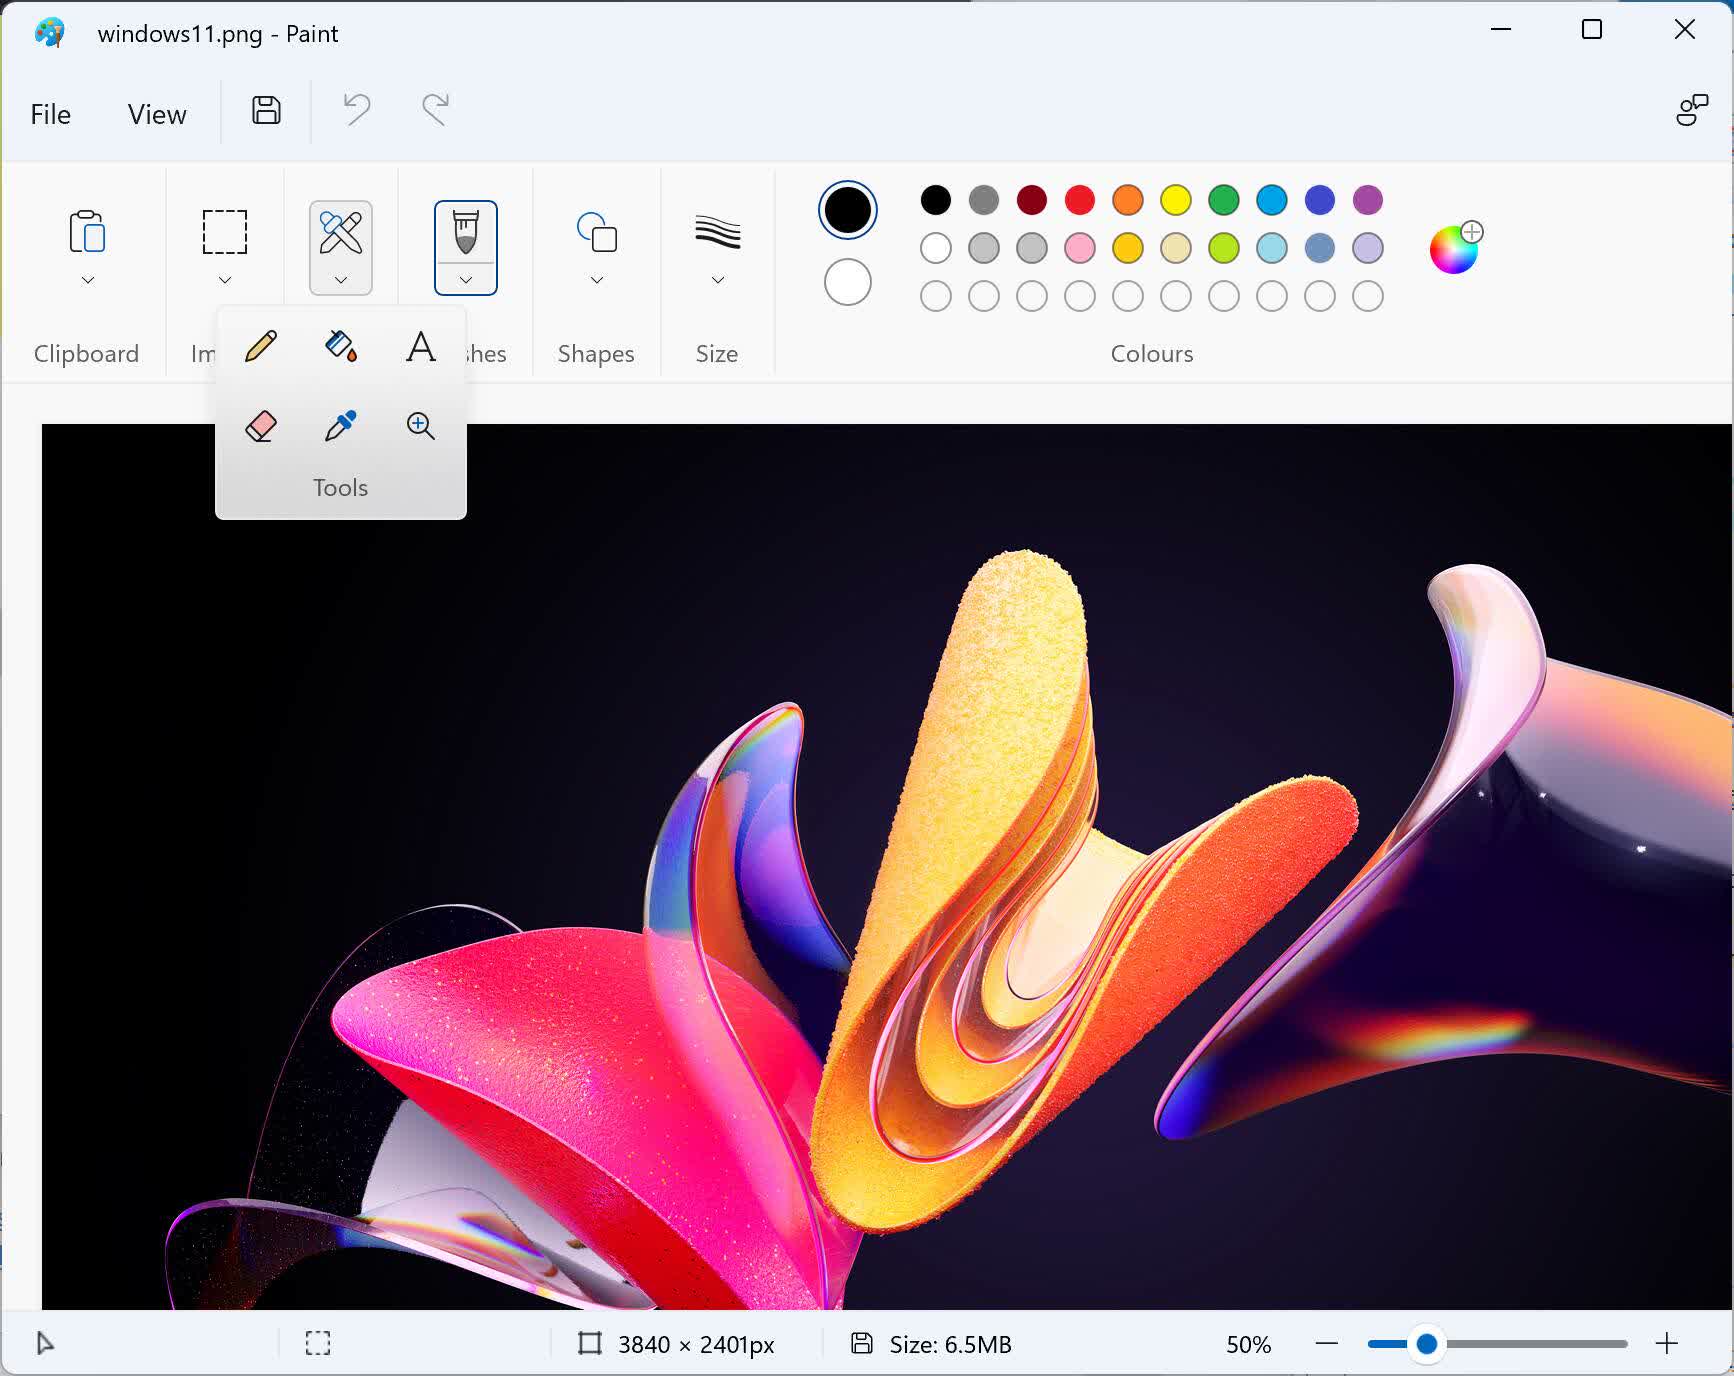 MS Paint could soon be getting one-click background removal capabilities